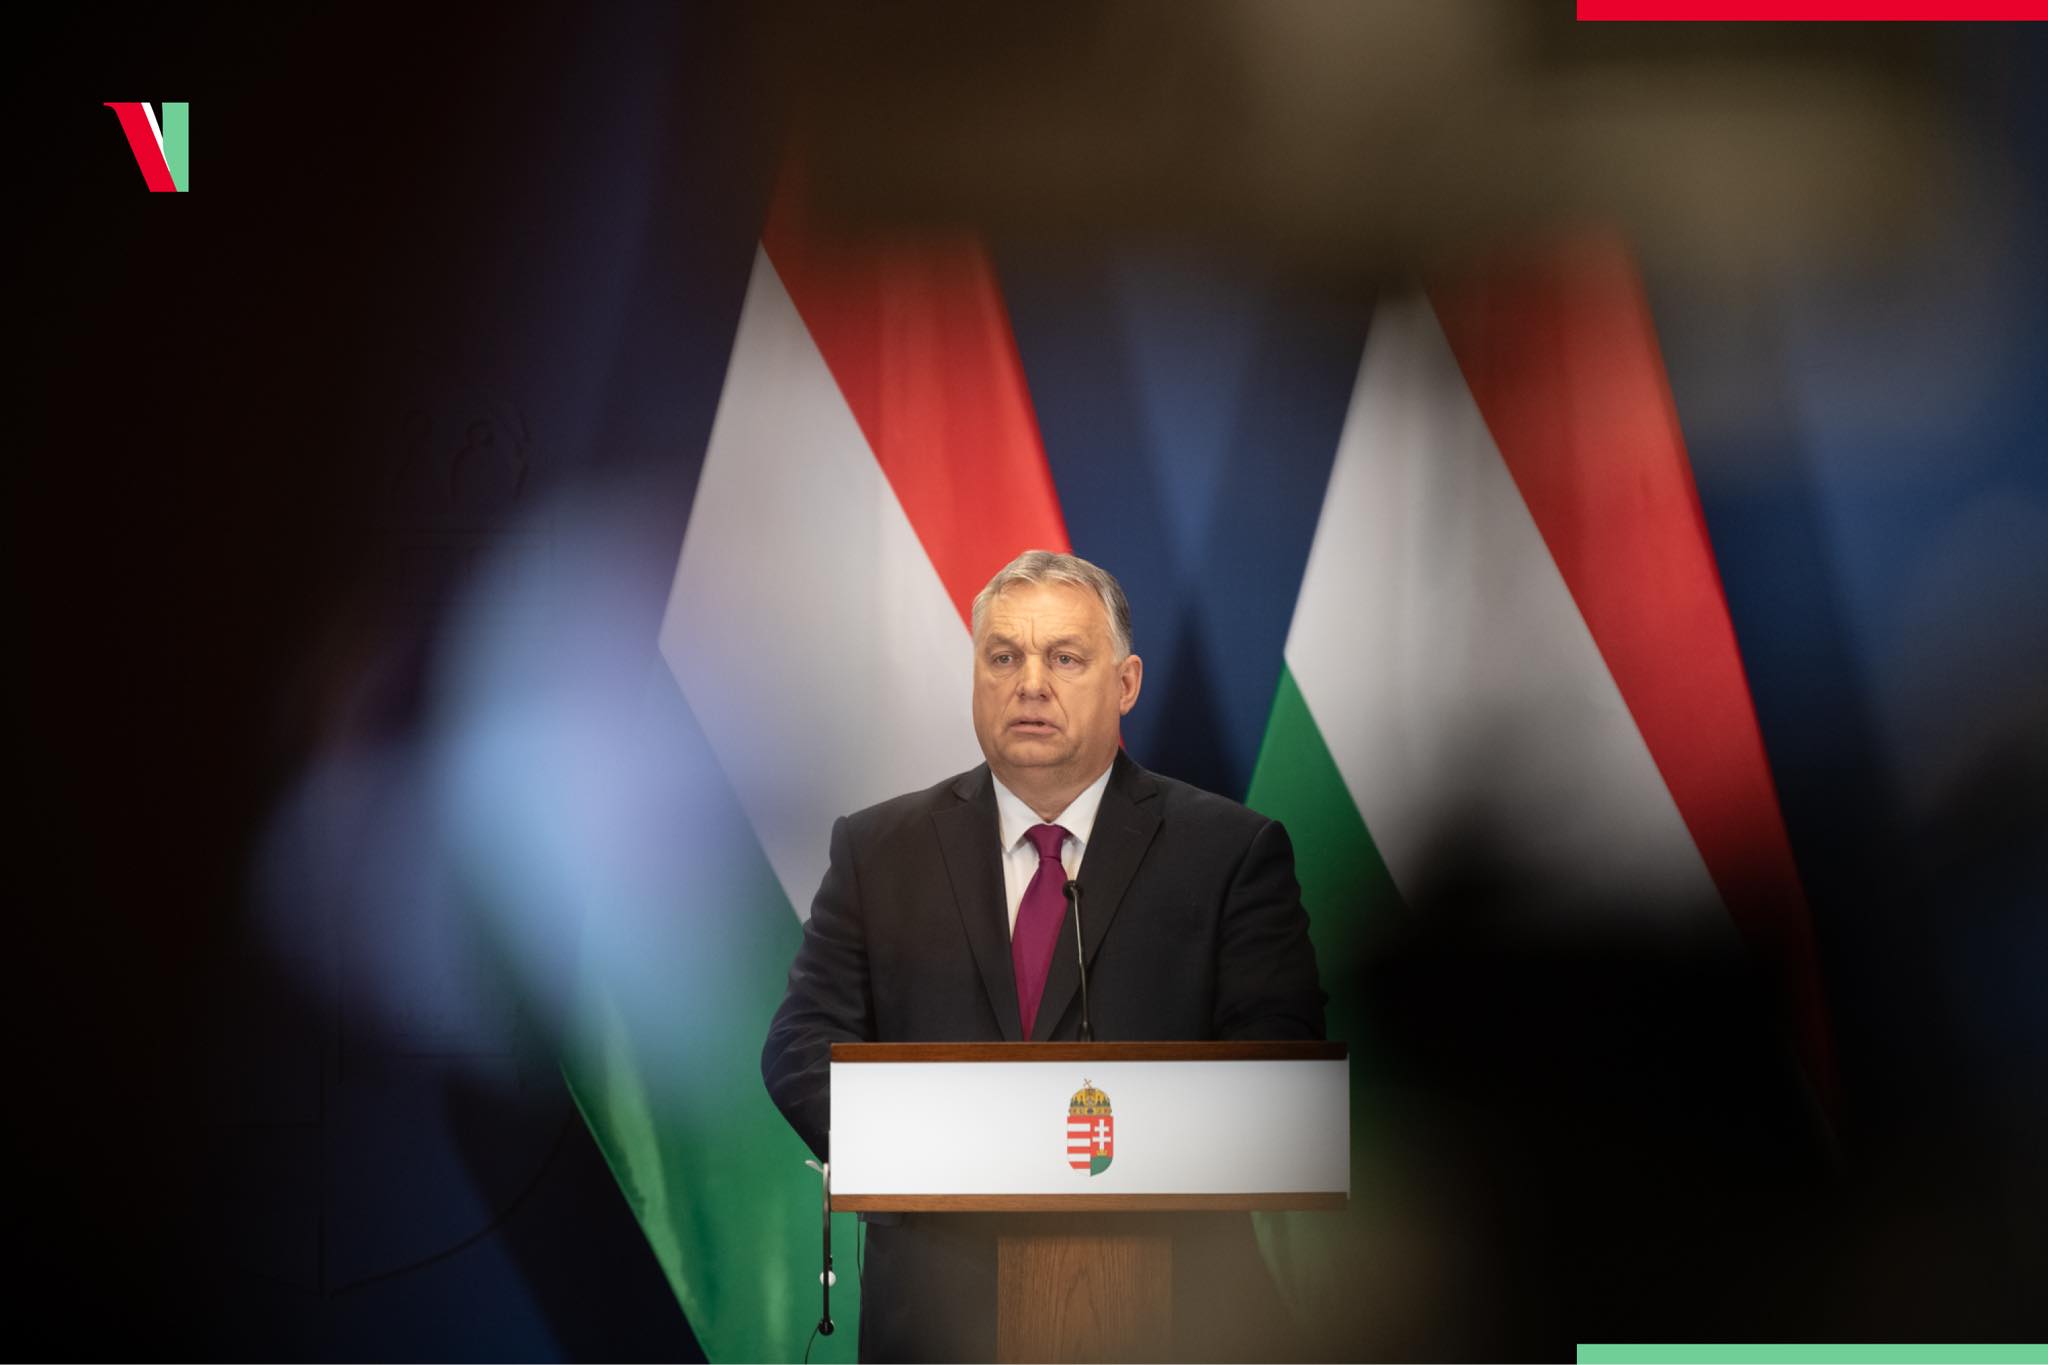 “Brussels Wants to Re-Settle Migrants by Force in Hungary